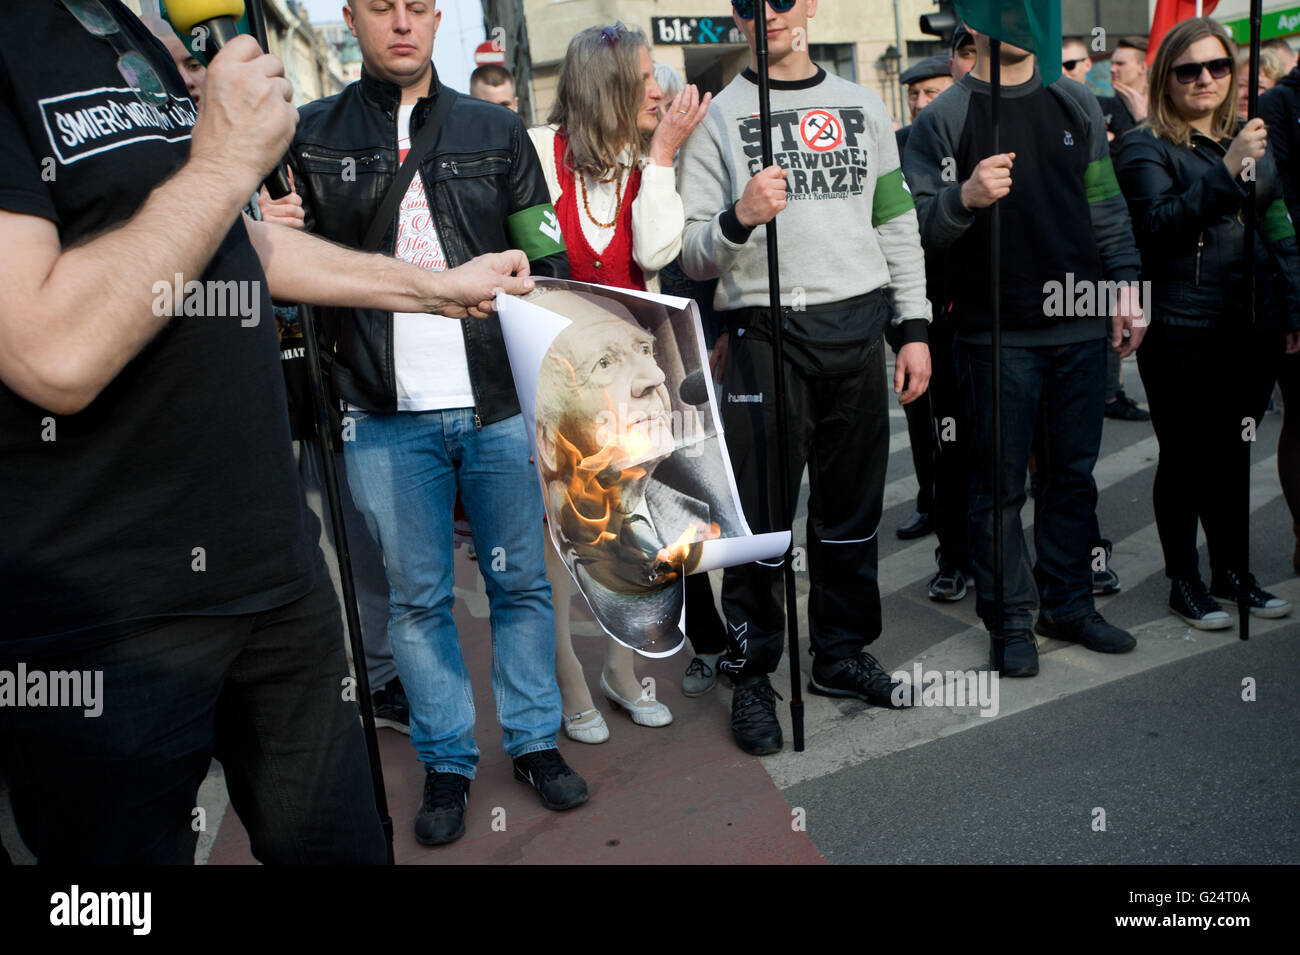 Wroclaw, Poland. 1st May, 2016. Roman Zielinski burns picture of Zygmunt Bauman during ONR protest in Wroclaw. Stock Photo